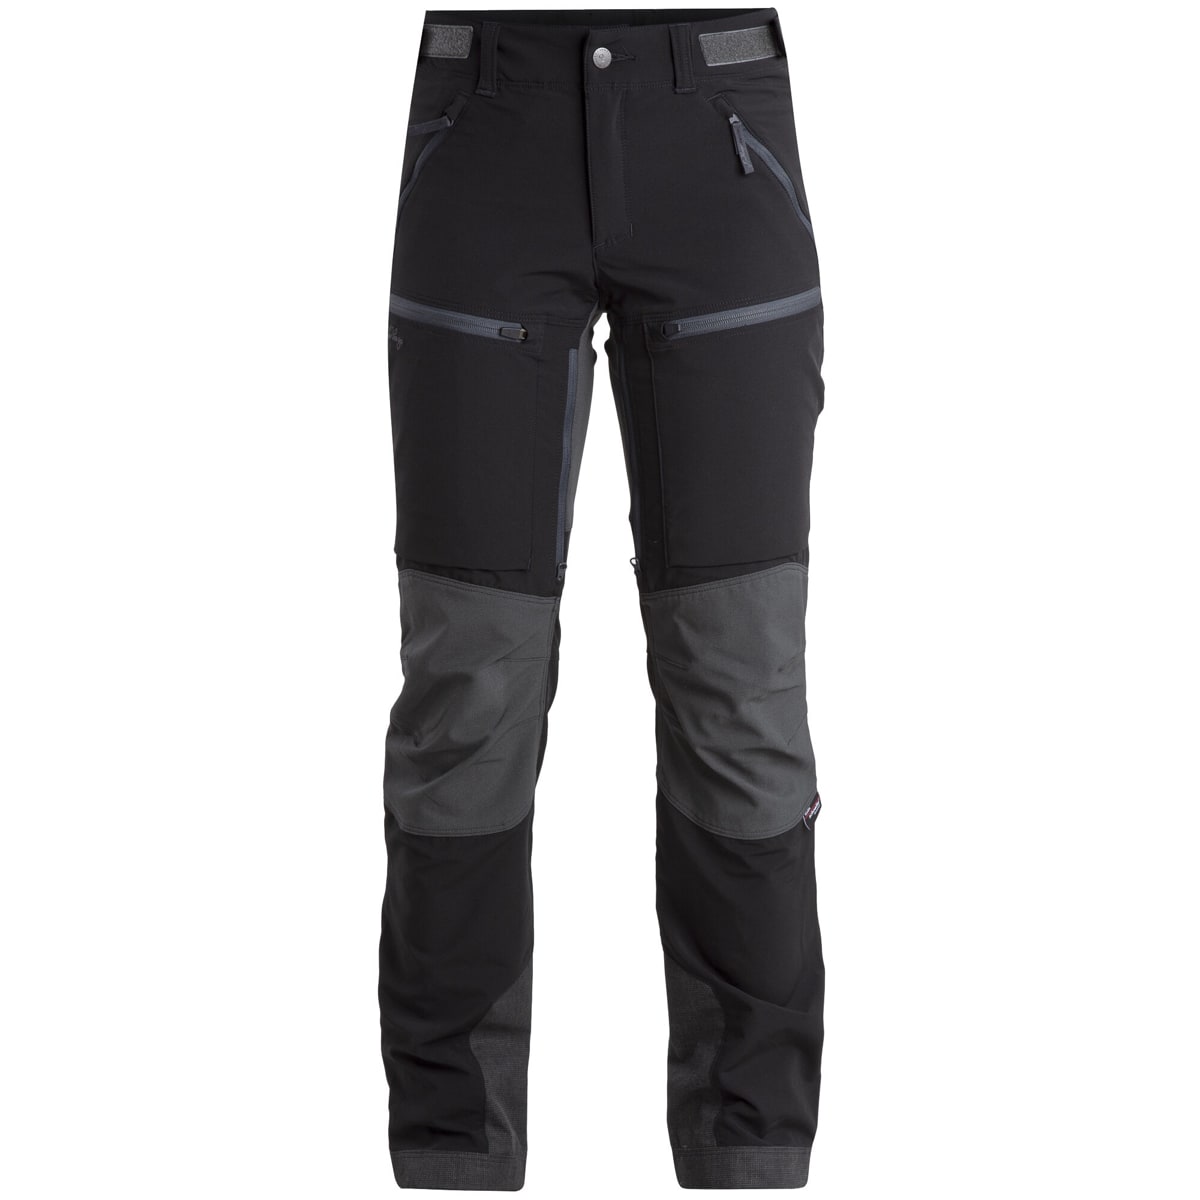 Lundhags Askro Pro Ws Pant Black/Charcoal